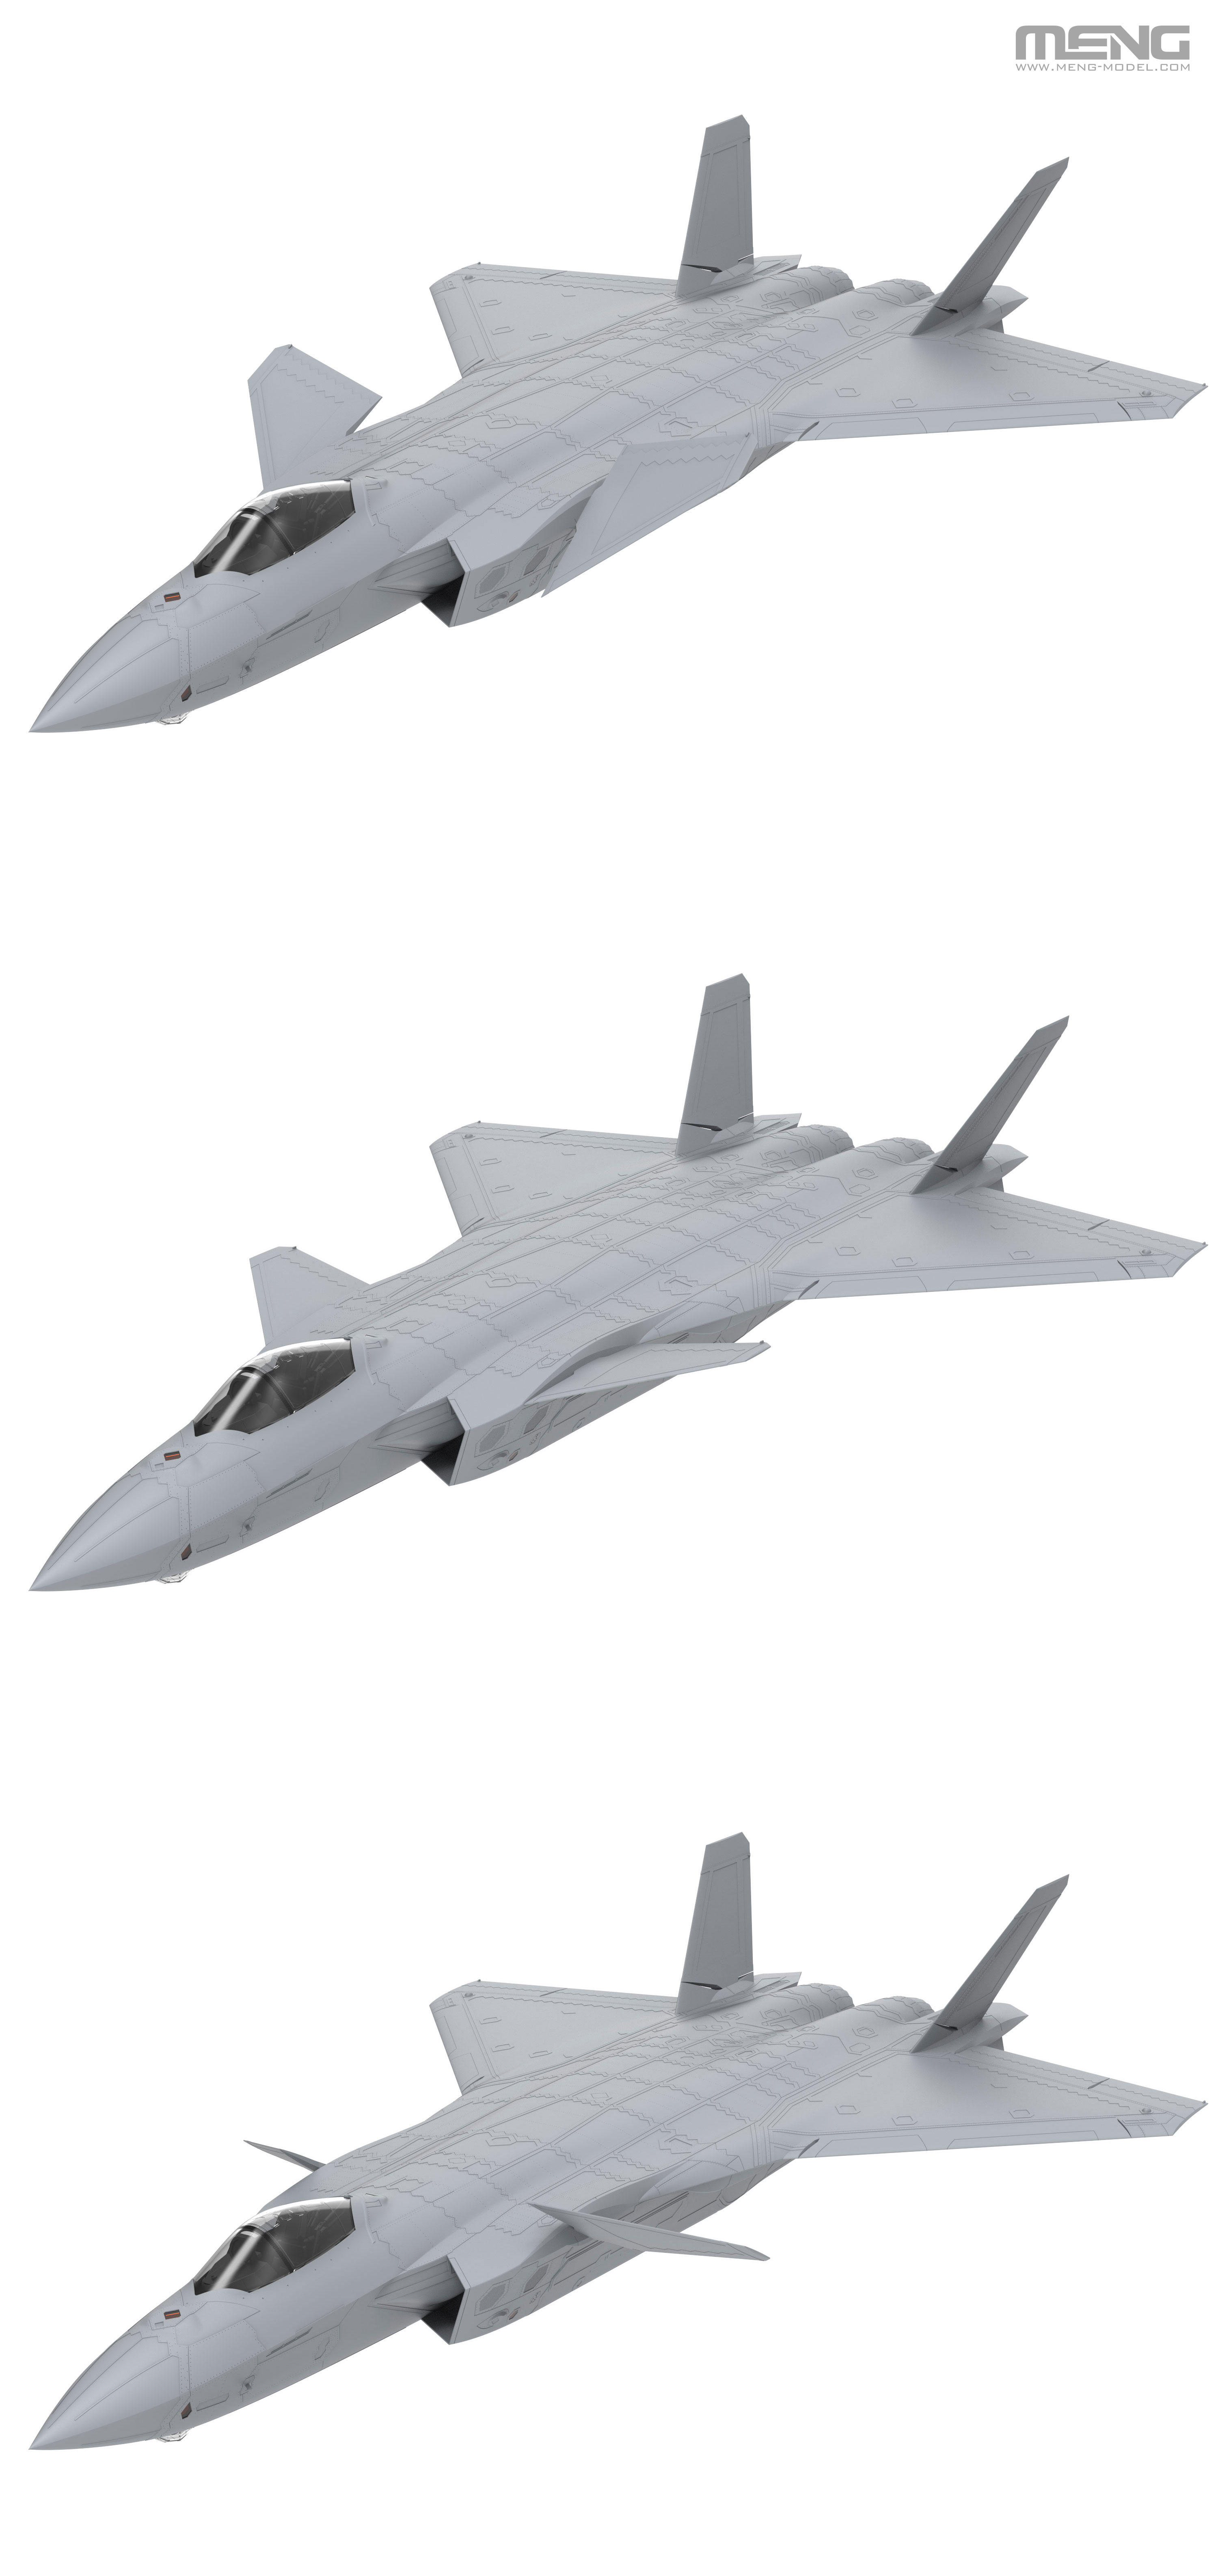 1/48 Chinese J-20 Stealth Fighter - Click Image to Close